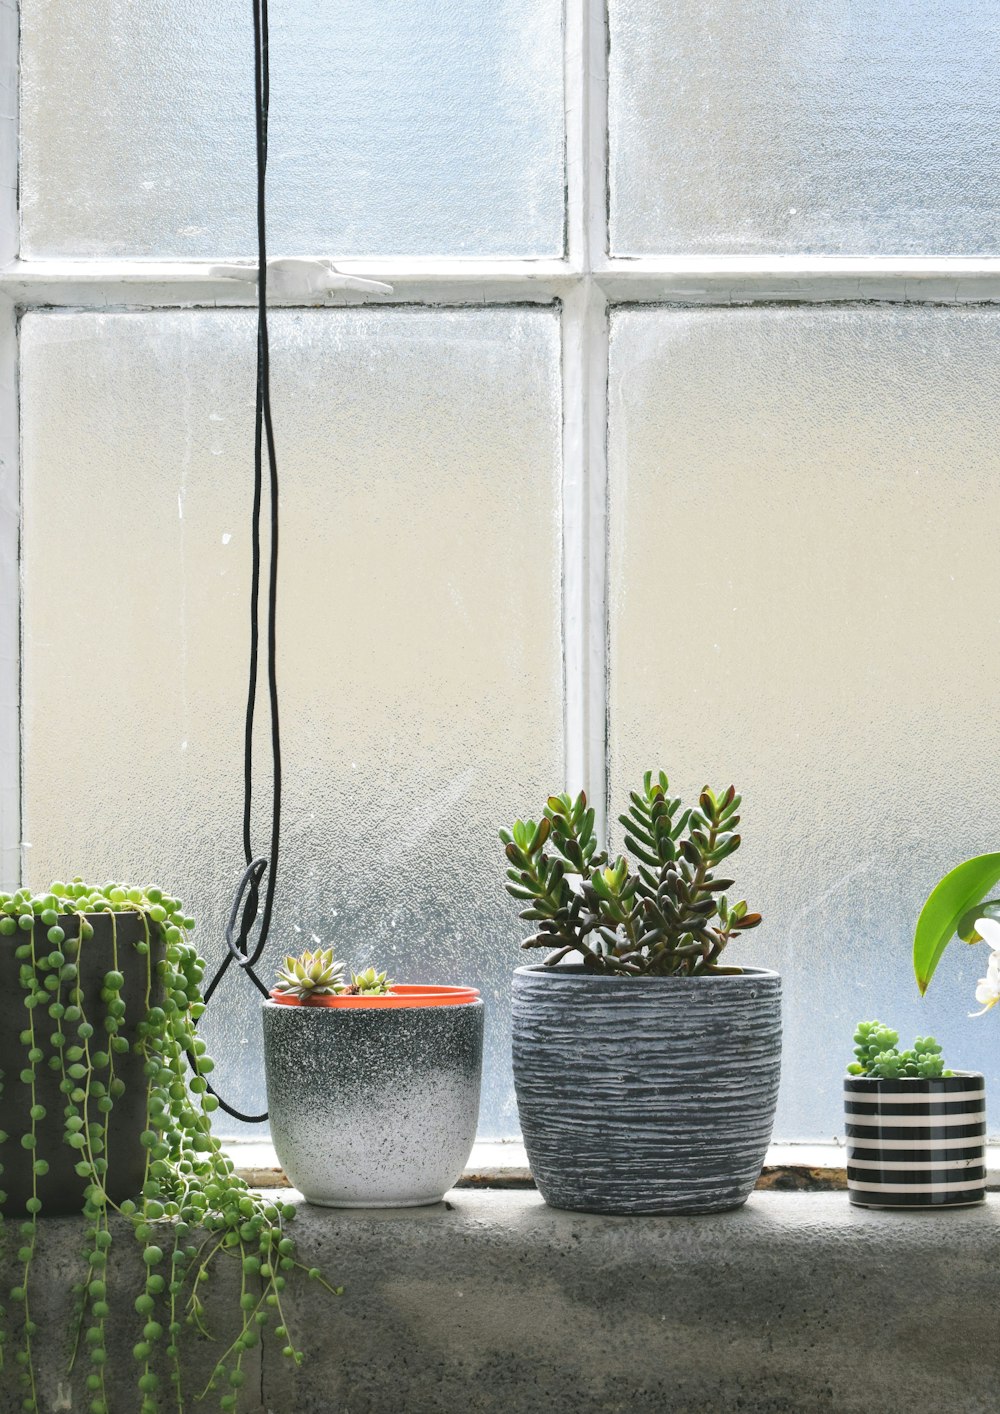 four potted plants placed near window